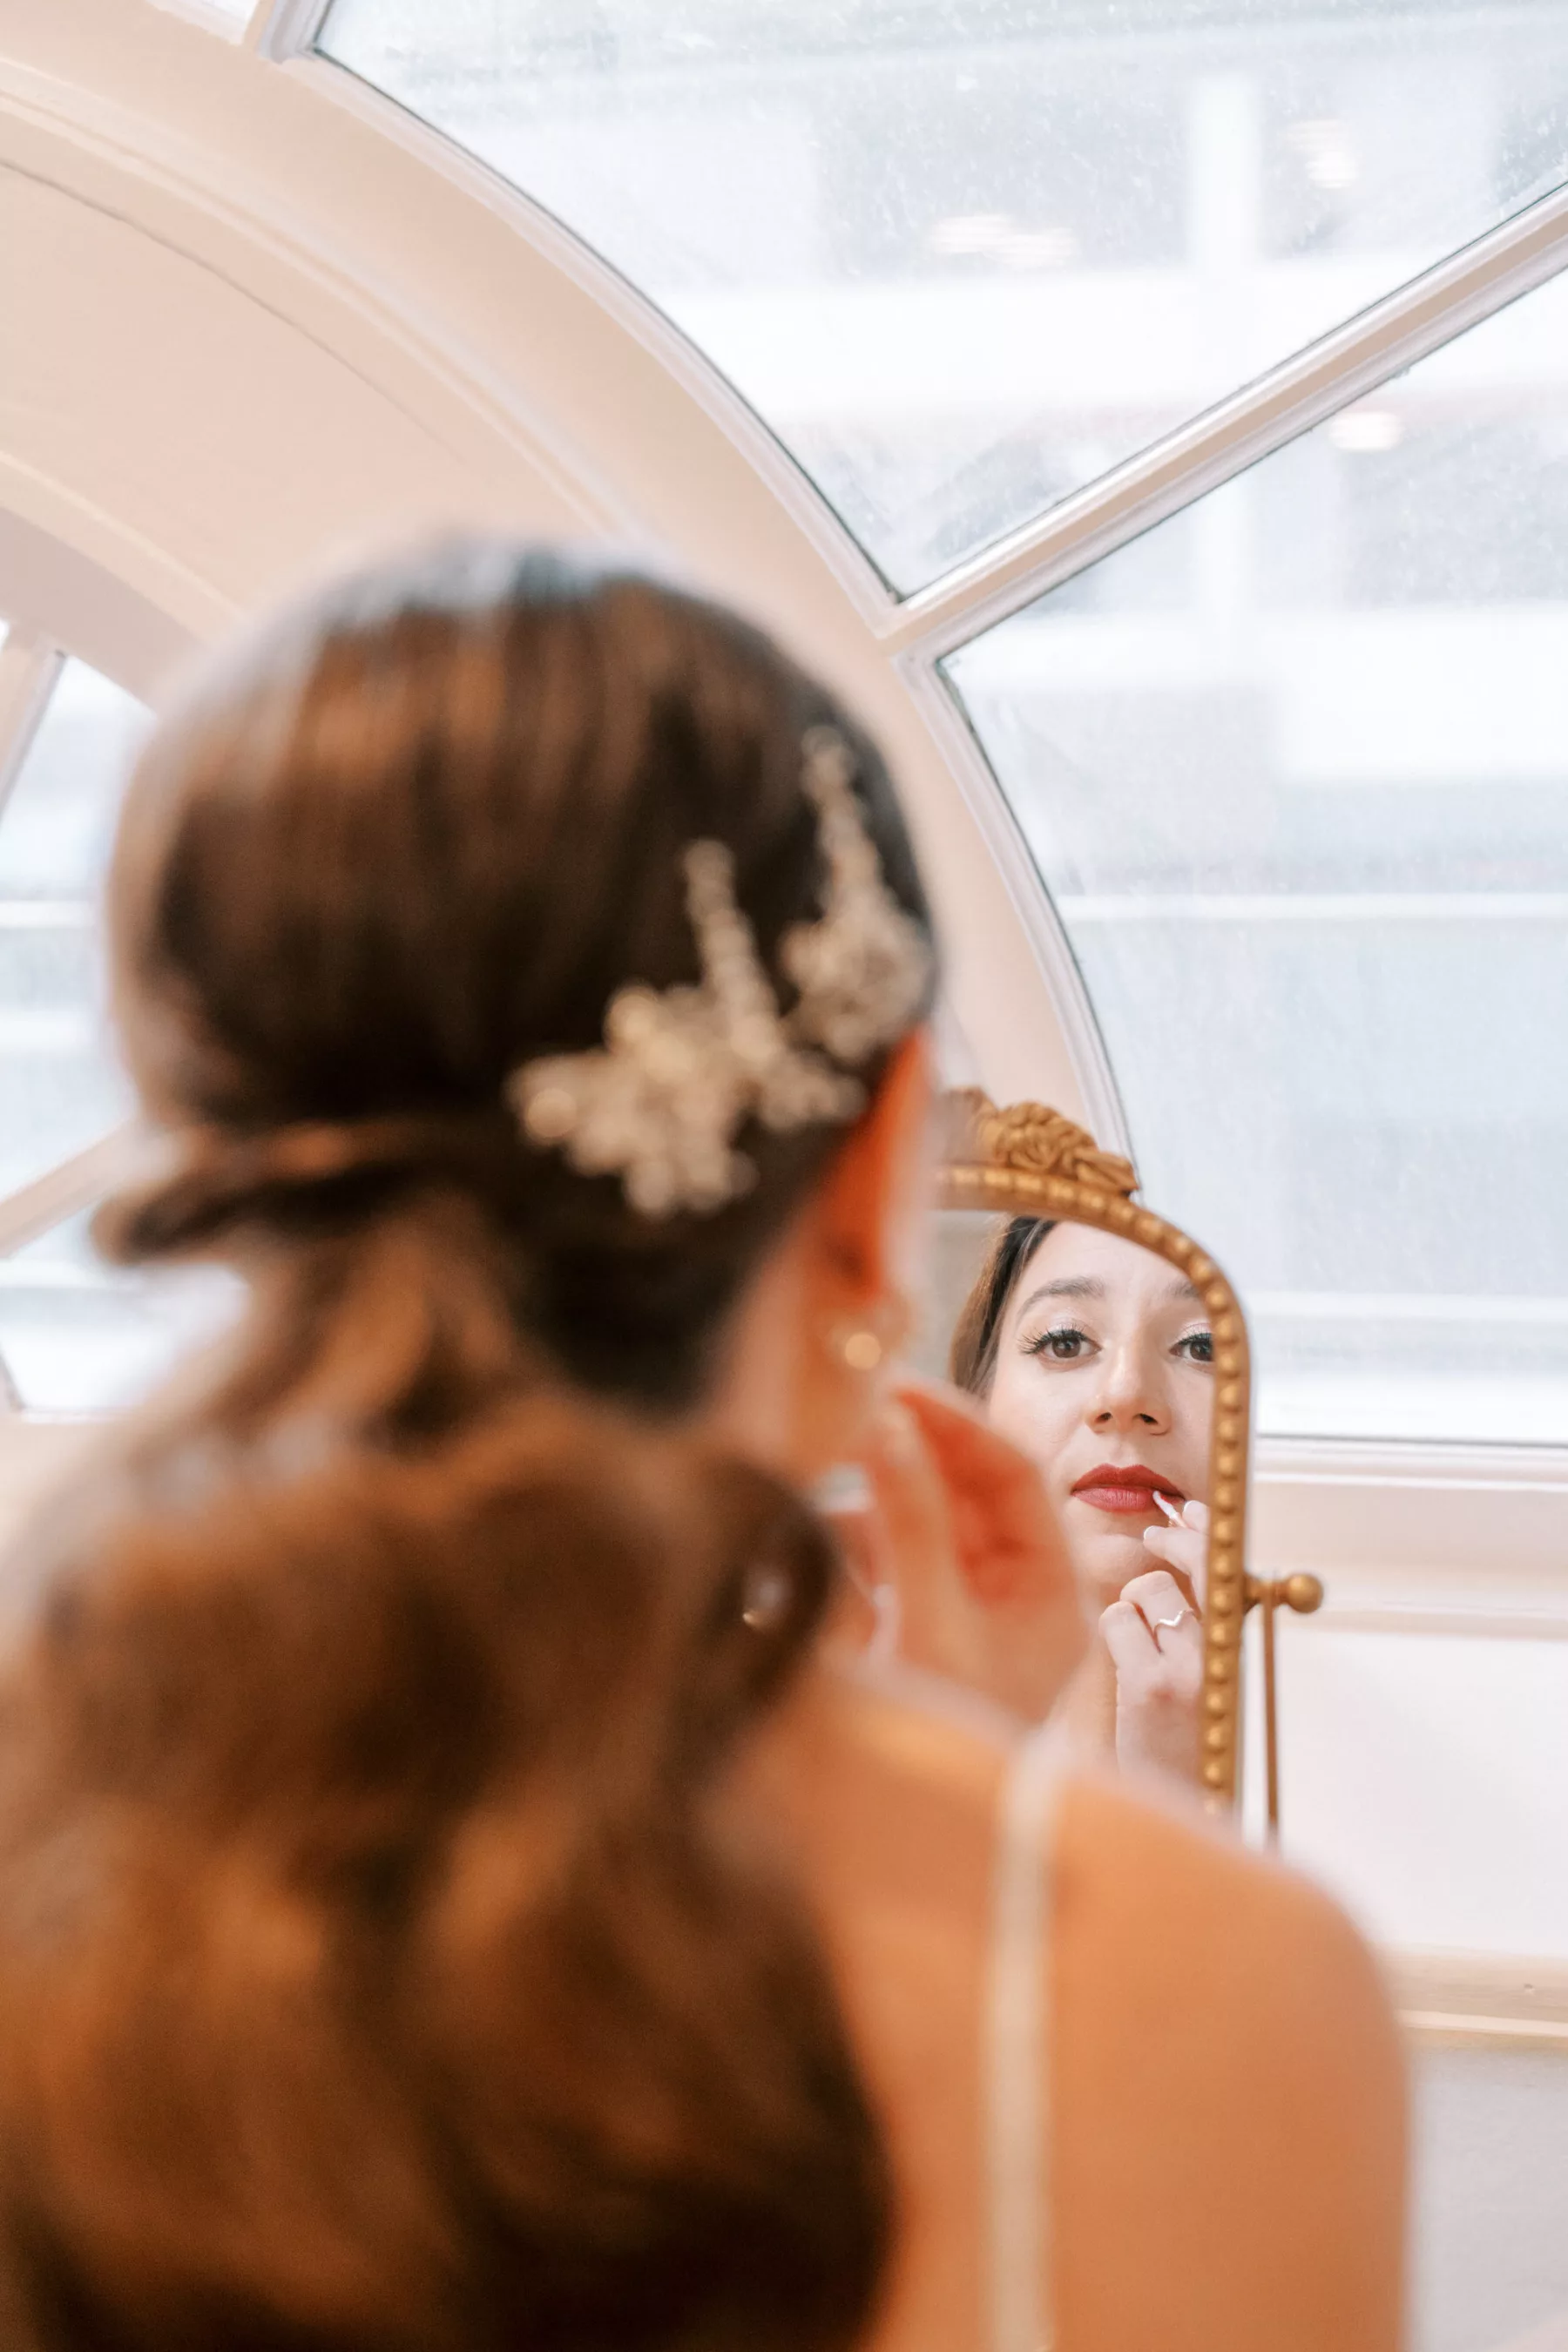 Great Gatsby Inspired Wedding Hair and Makeup Inspiration | Tampa Bay Hair and Makeup Artist Michele Renee the Studio